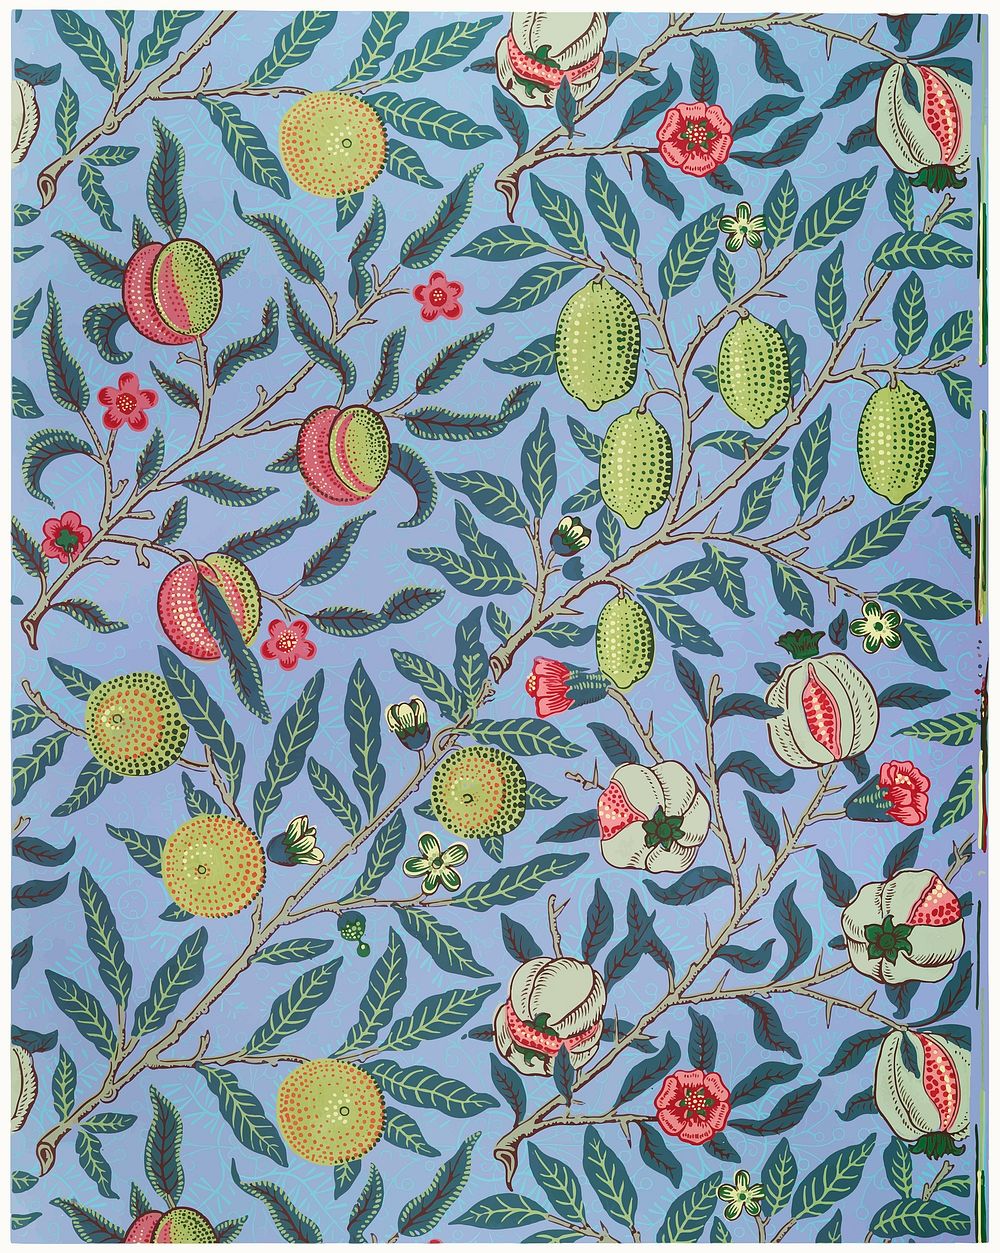 Fruit or Pomegranate by William Morris. Digitally enhanced and vectorized by rawpixel.